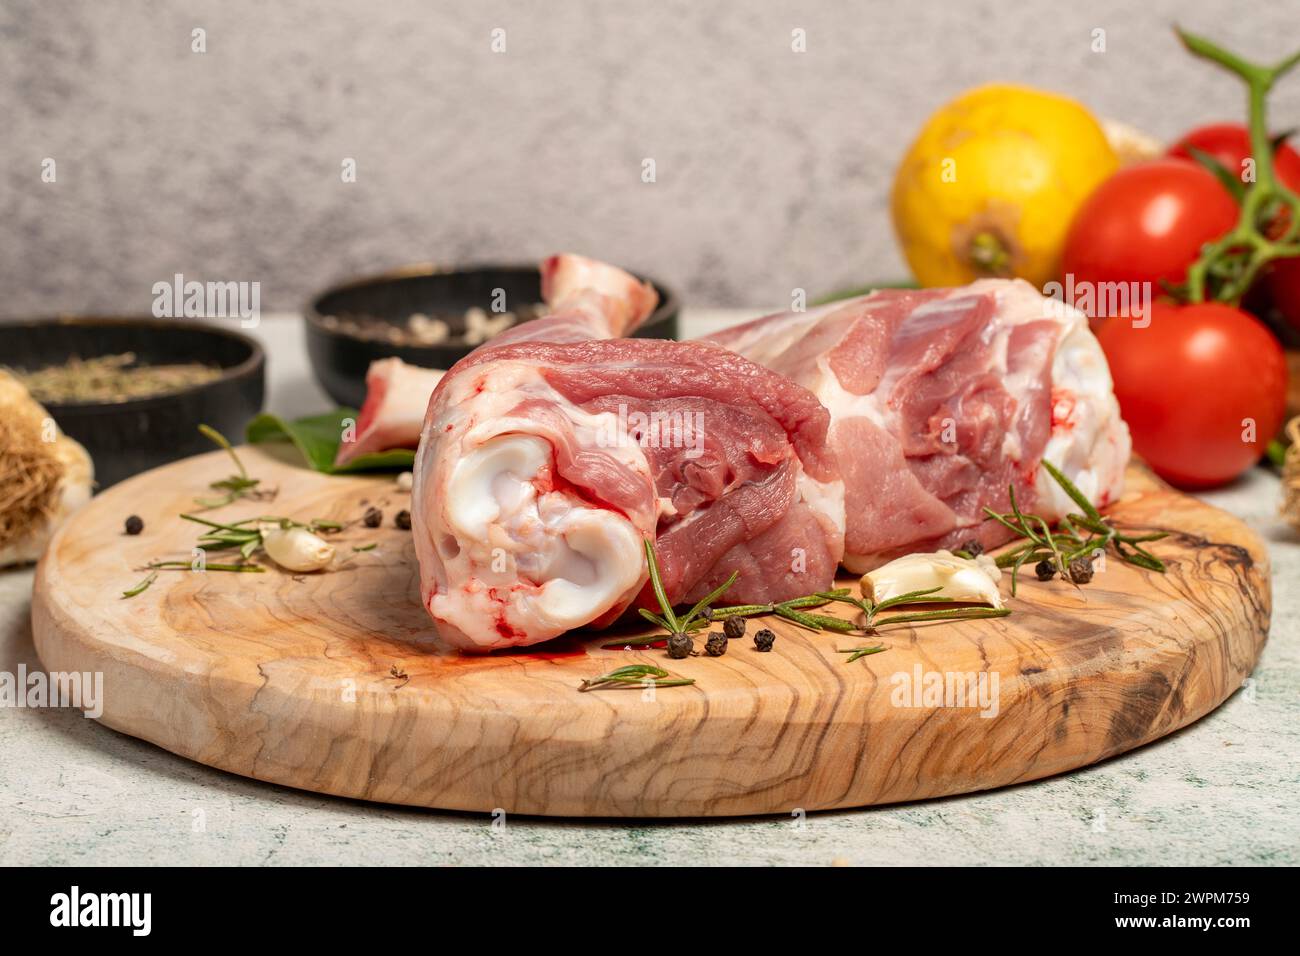 Lamb's shank. Butcher products. Lamb shank steak with bones on stone background Stock Photo